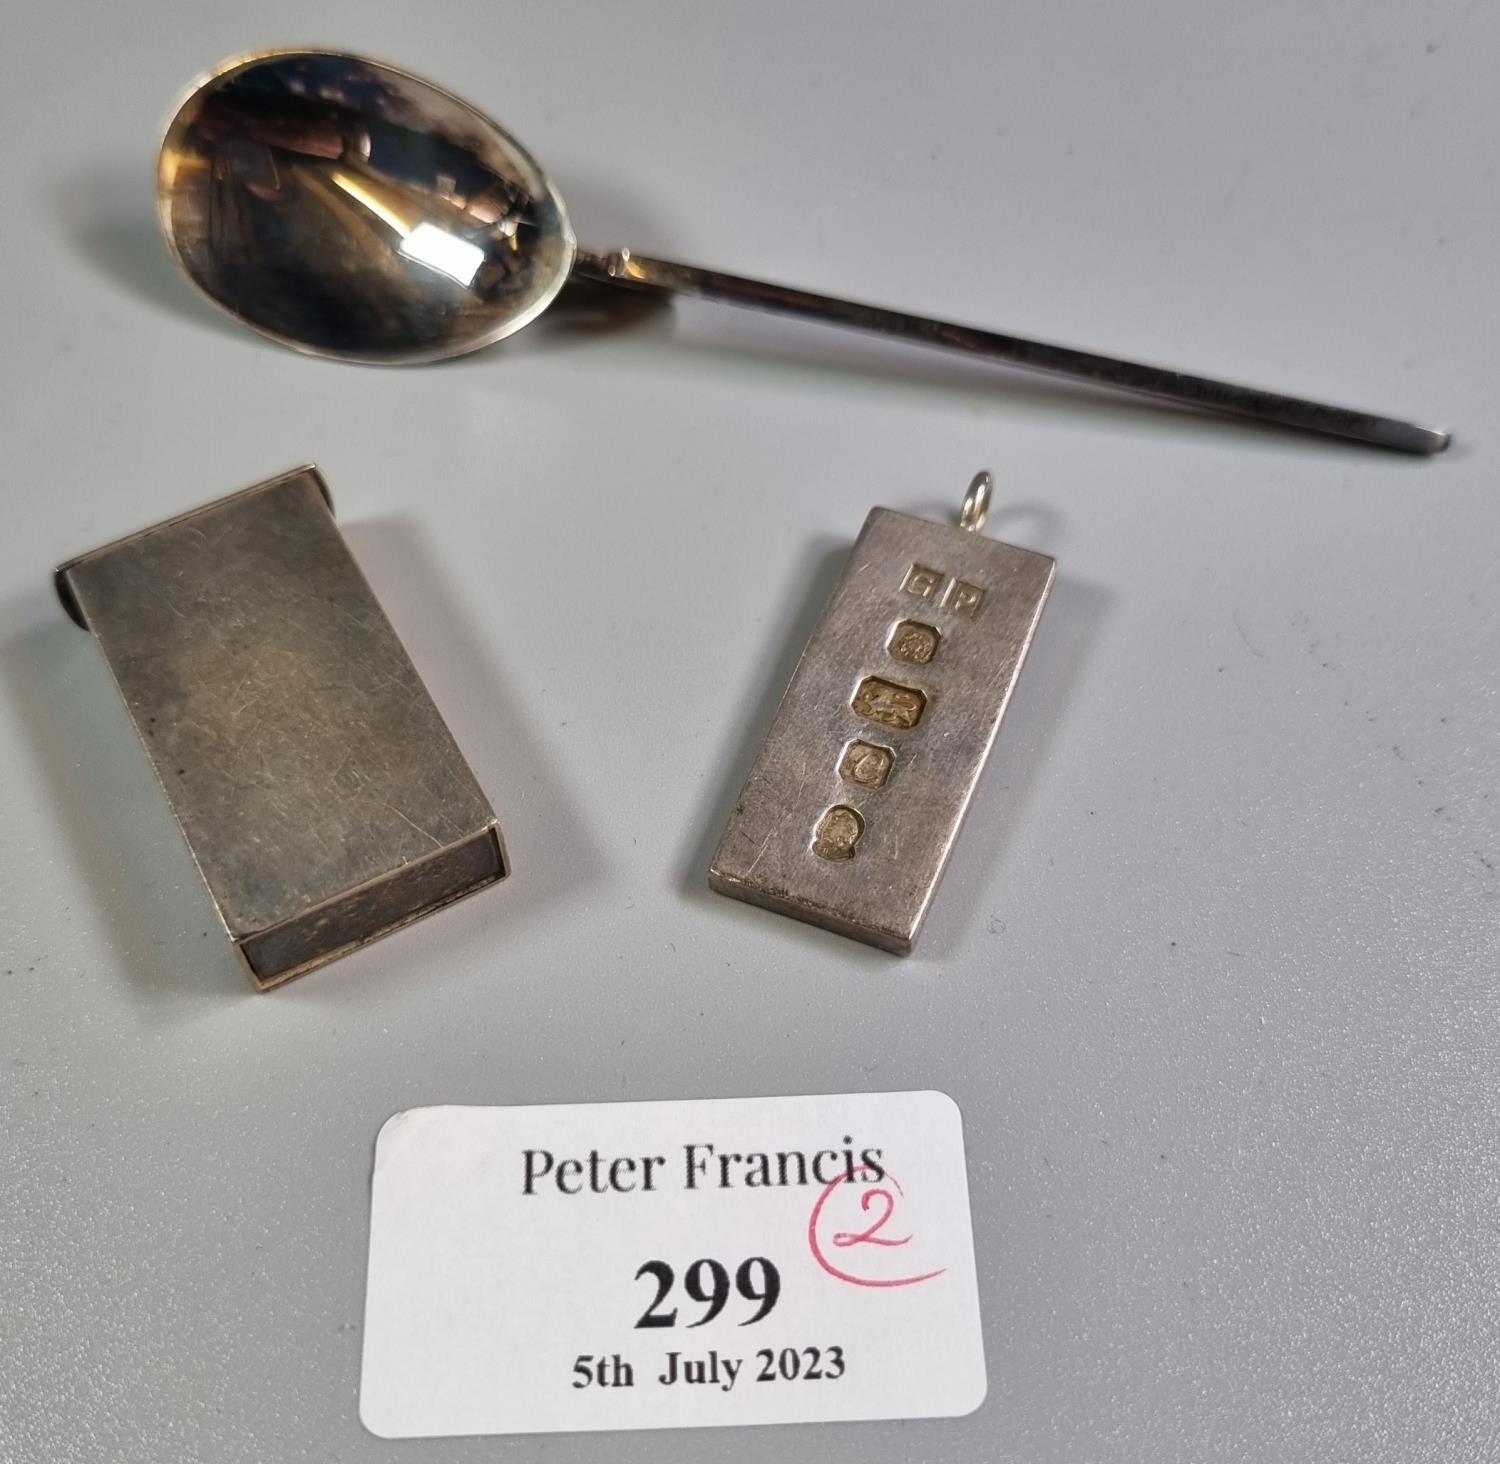 Reproduction cased silver design of a roman spoon together with a silver hallmarked ingot pendant